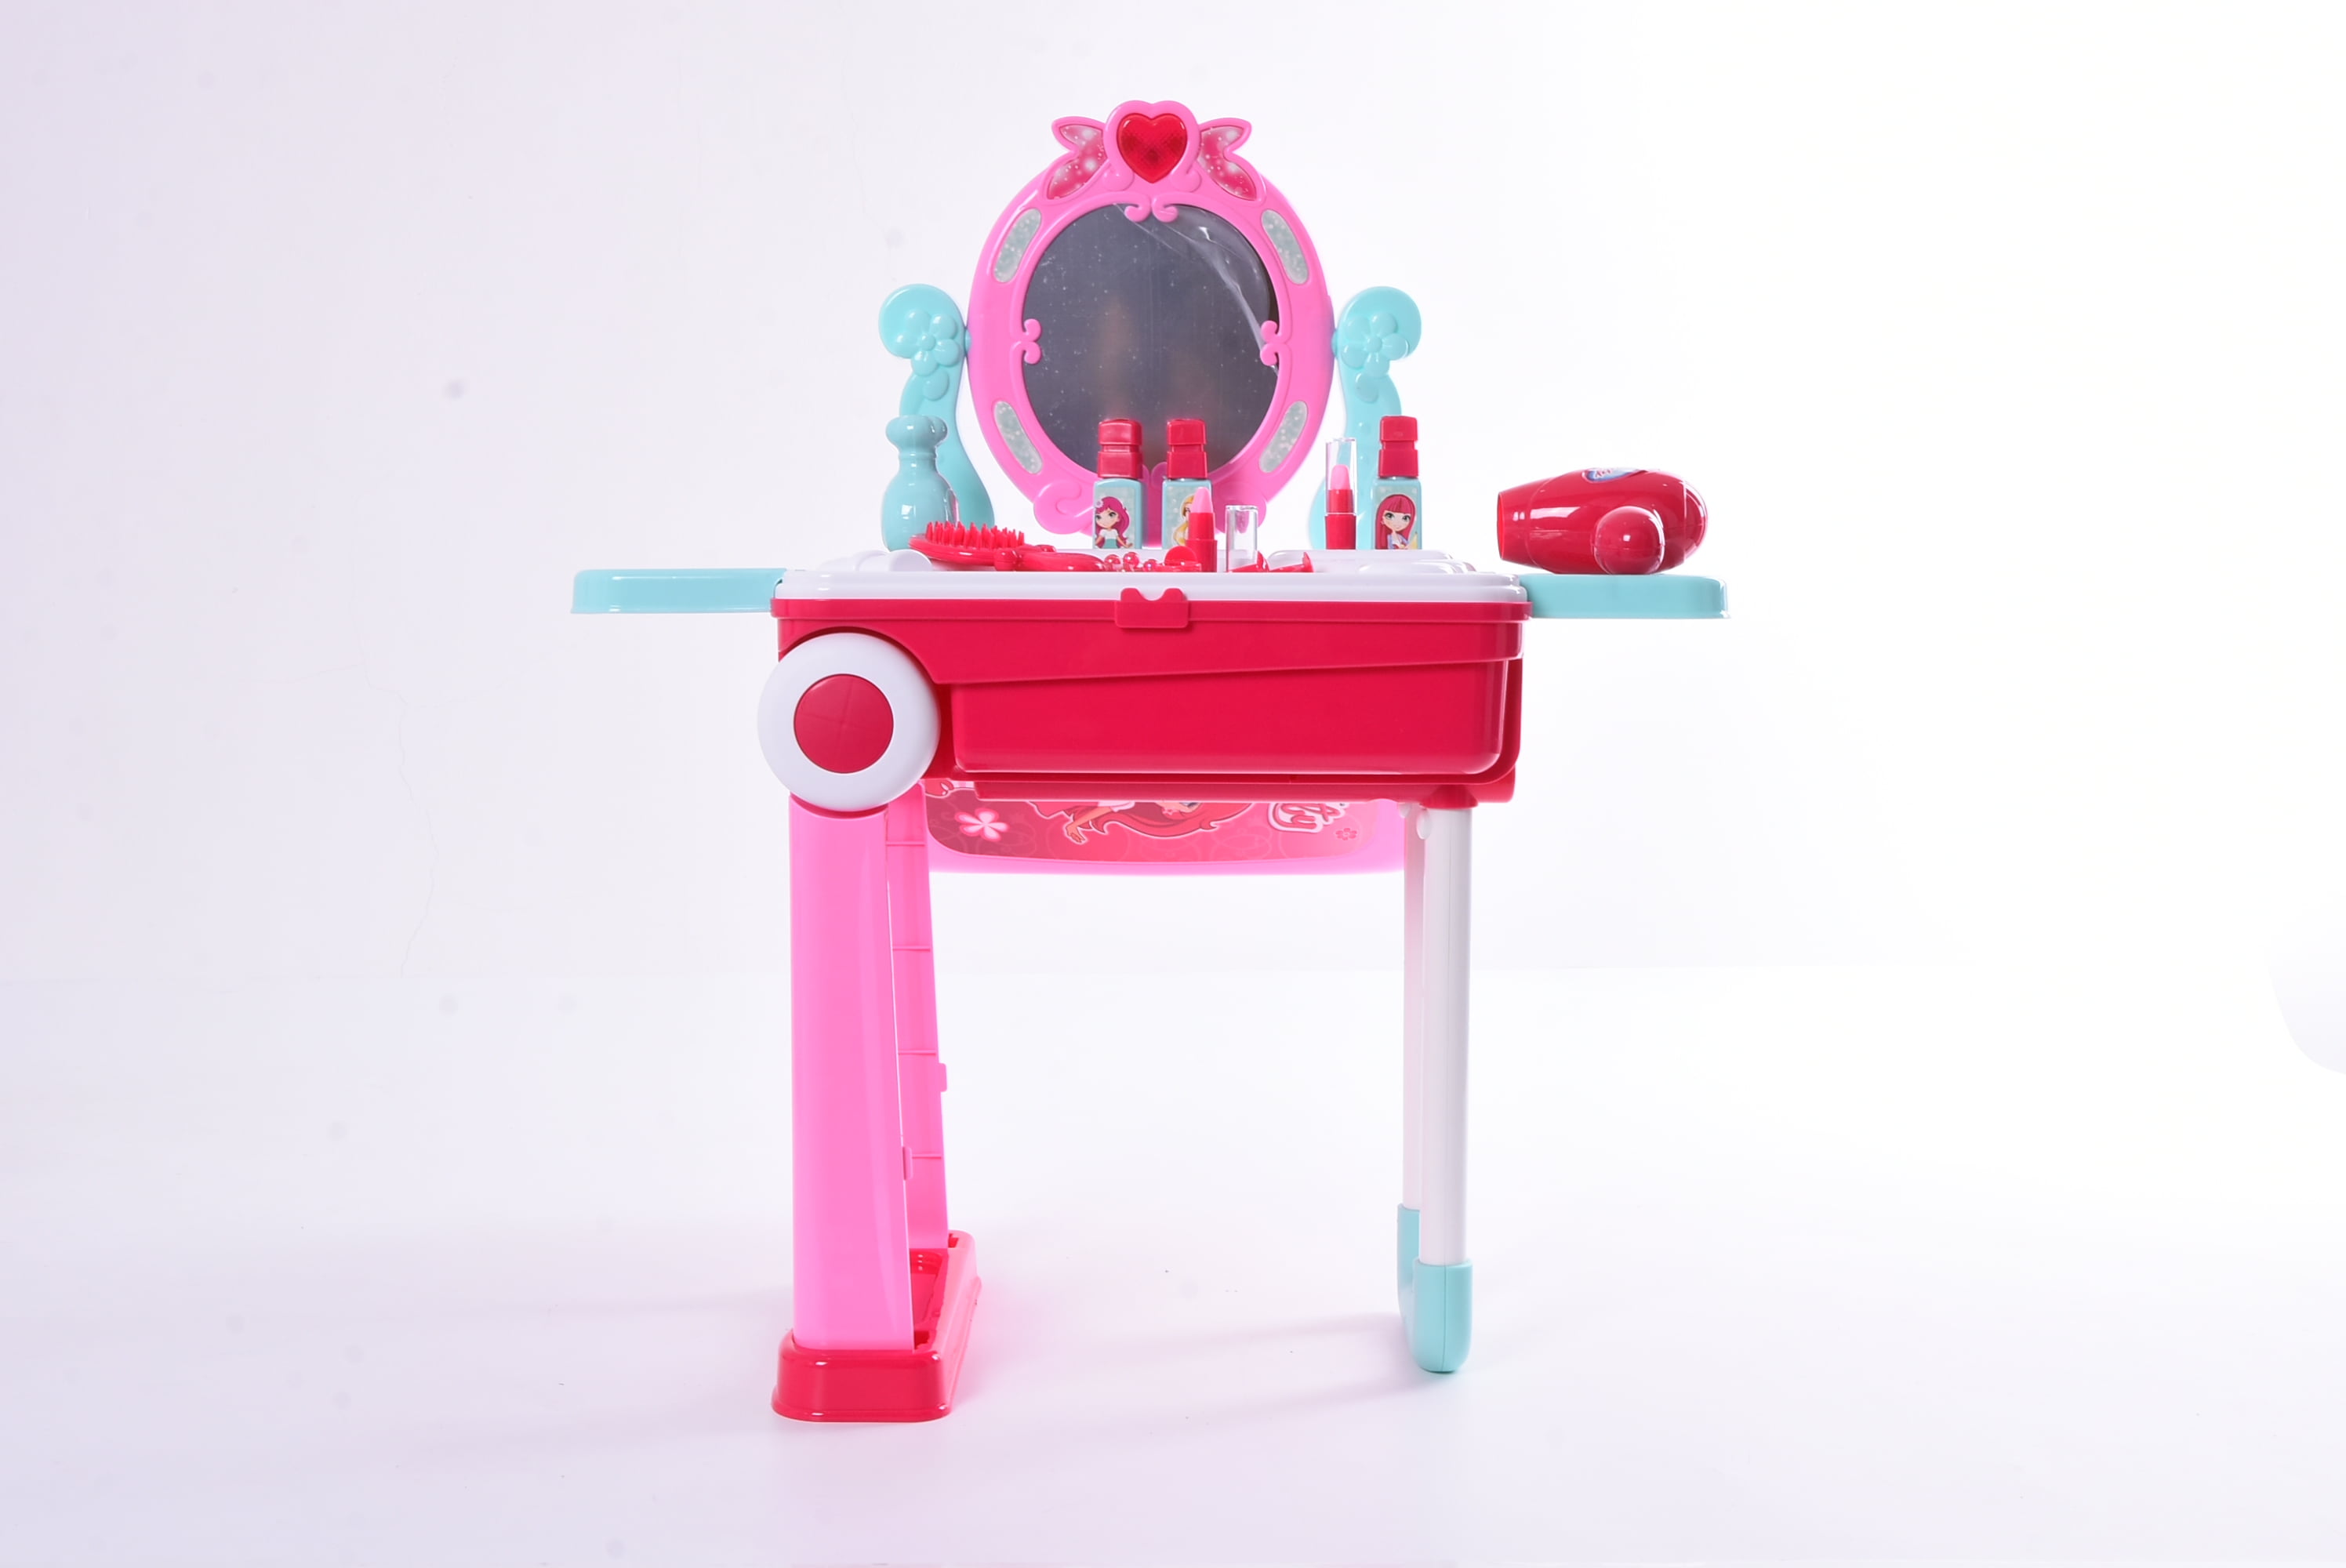 Wonderplay Pretend Play Kids Vanity Table And Chair Beauty Mirror And Accesories Play Set With Fashion Makeup Accessories For Girls Brickseek